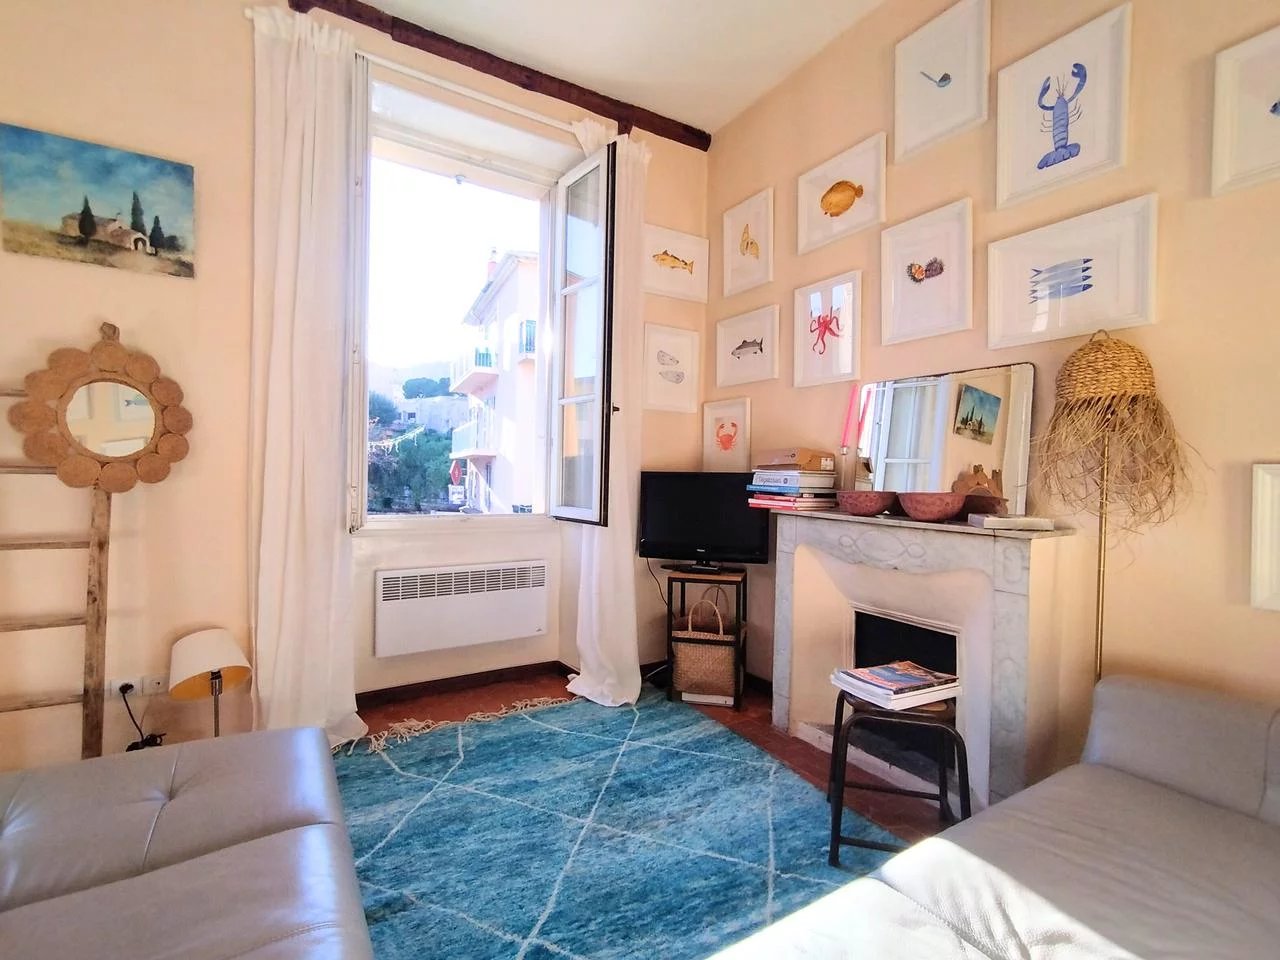 Appartement  3 Rooms 73m2  for sale   399 000 €